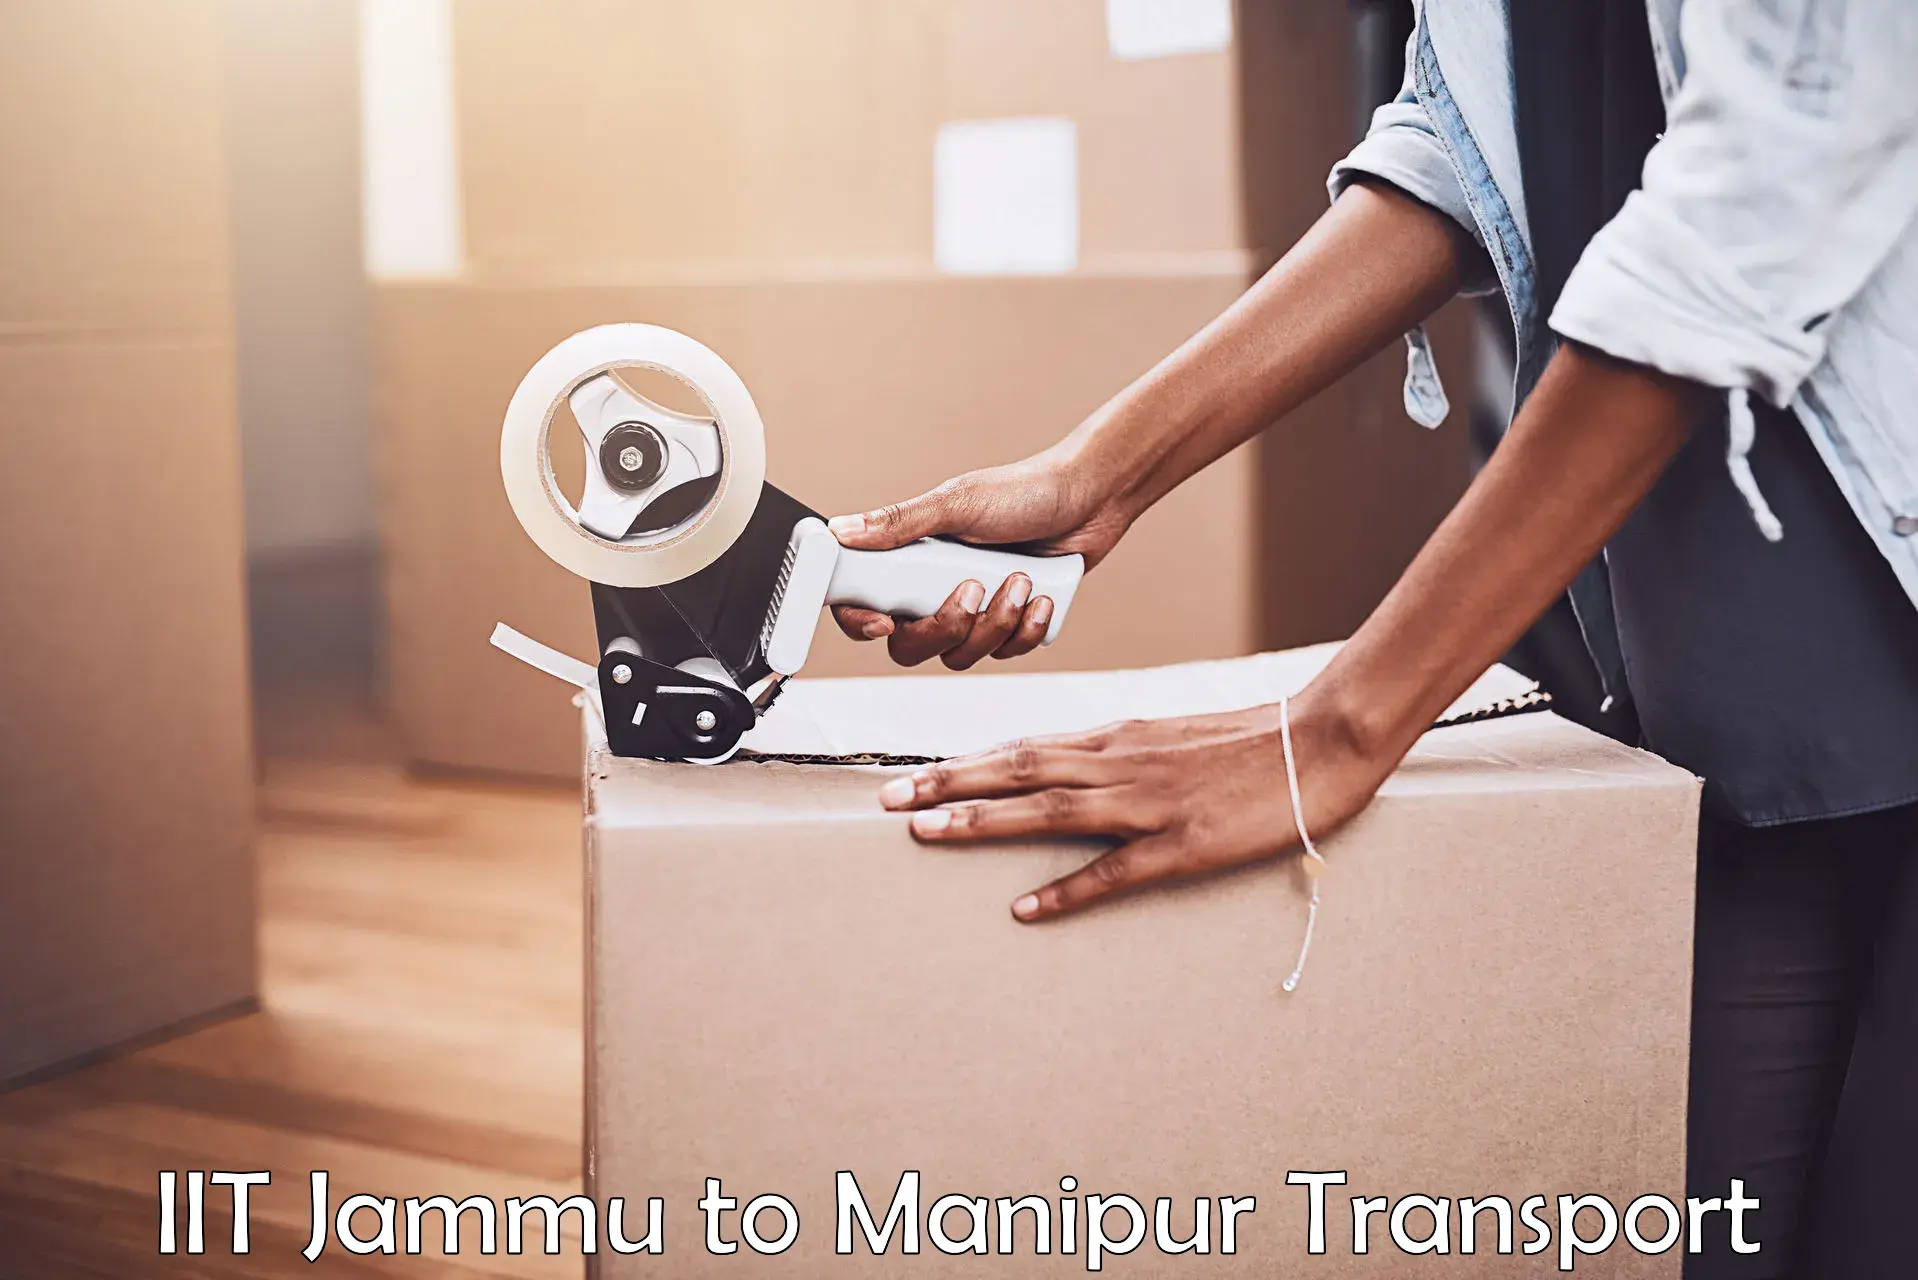 Delivery service IIT Jammu to Manipur